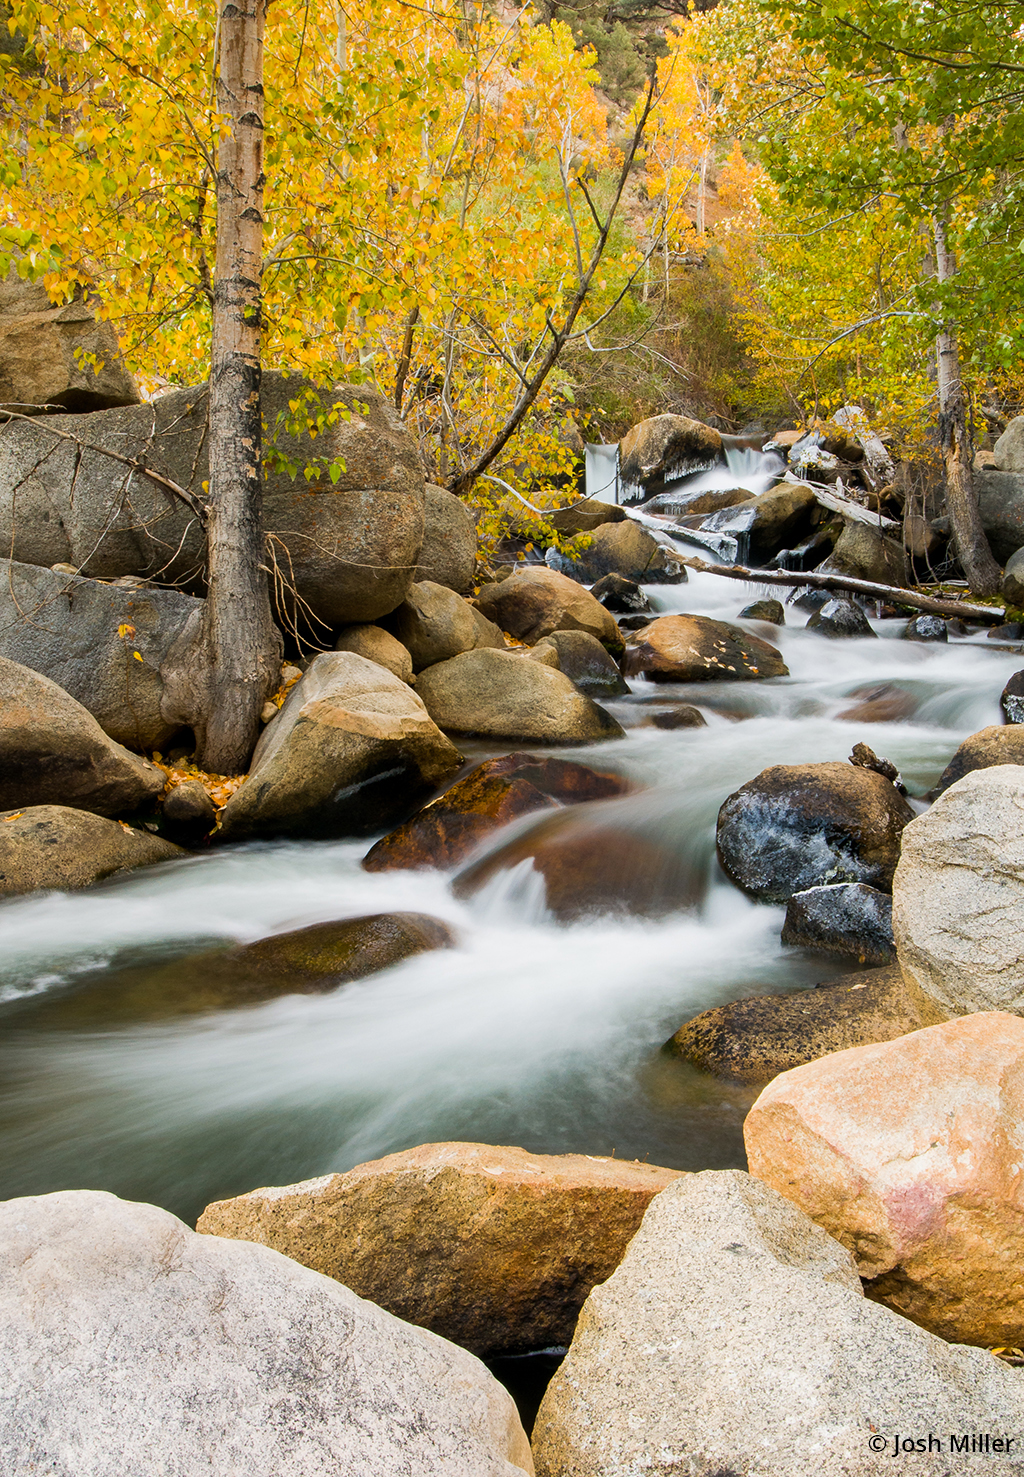 Image of fall foliage and a stream taken with a circular polarizer